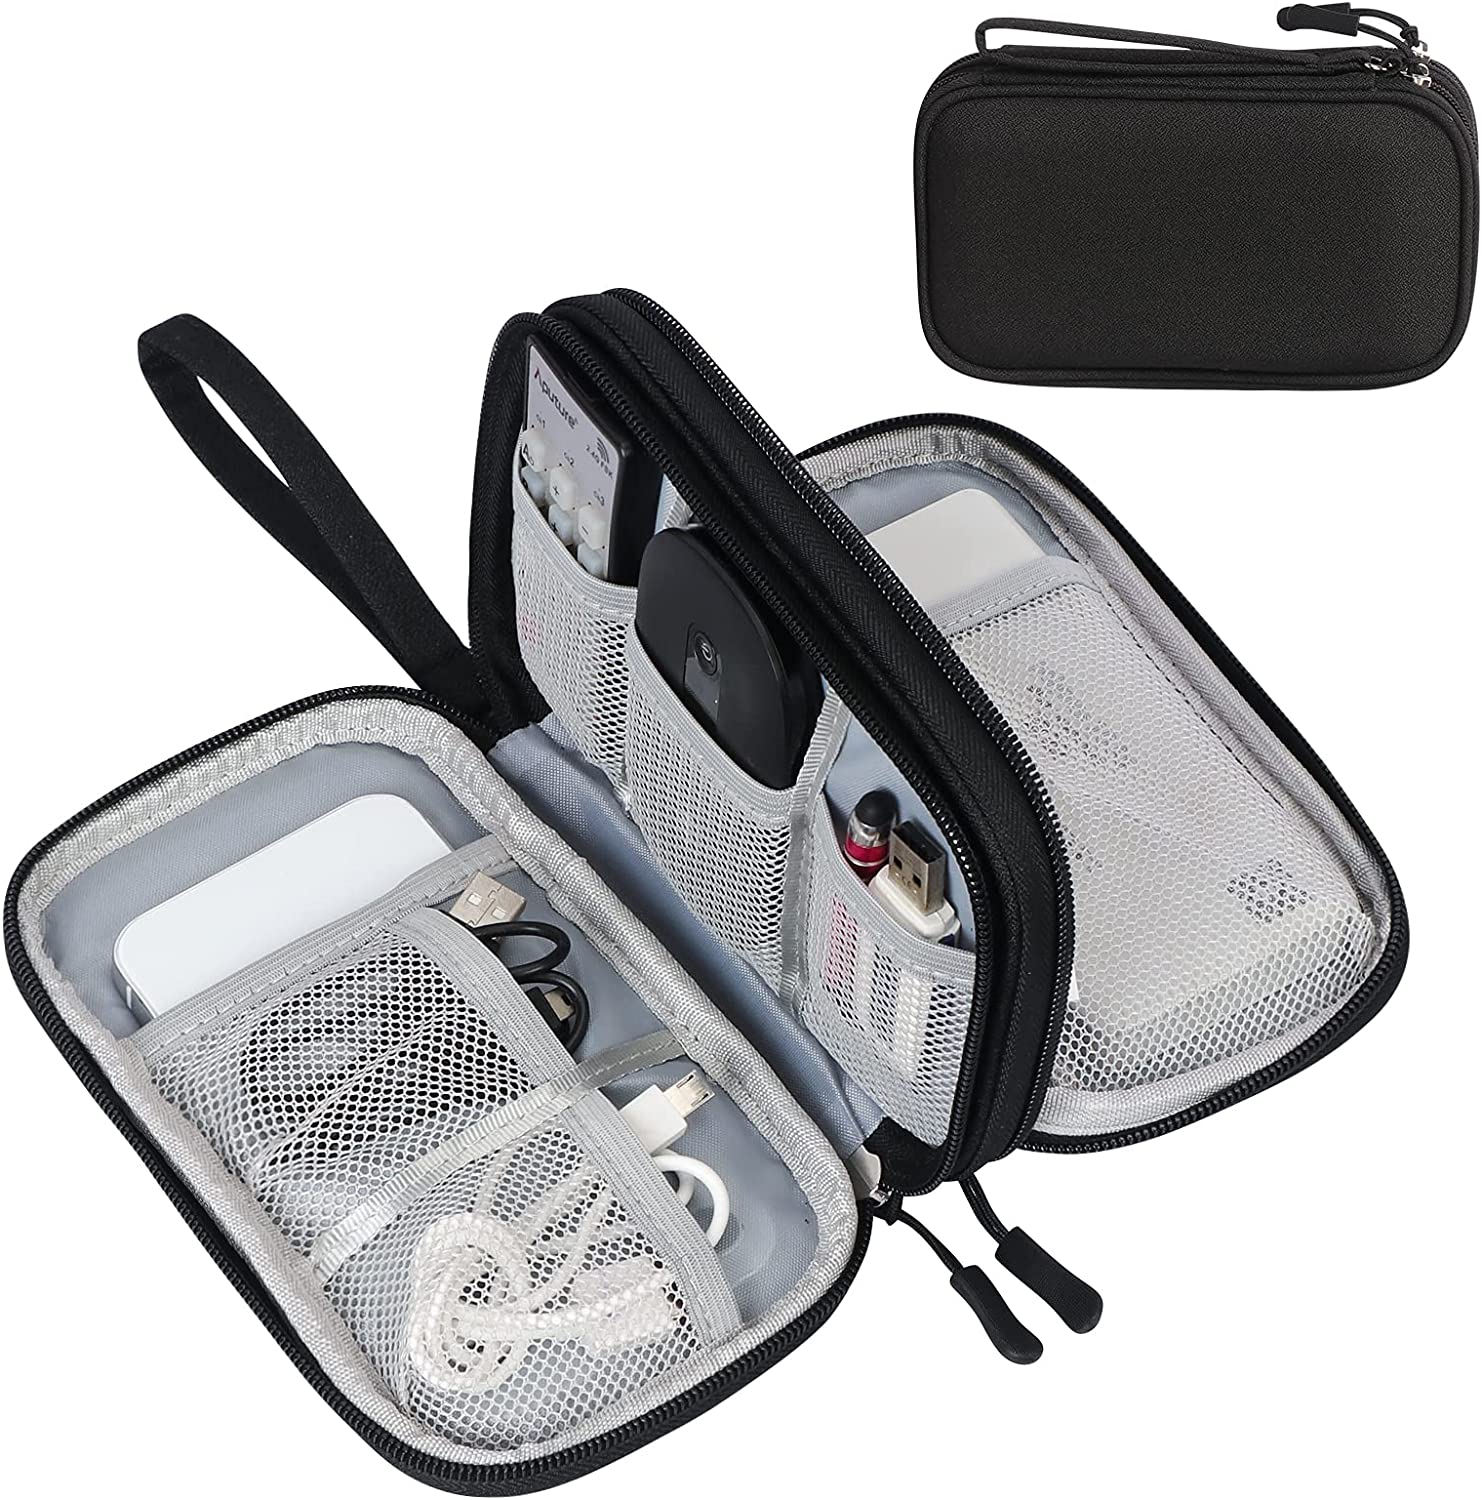 FYY Travel Cable Organizer Pouch Electronic [...]